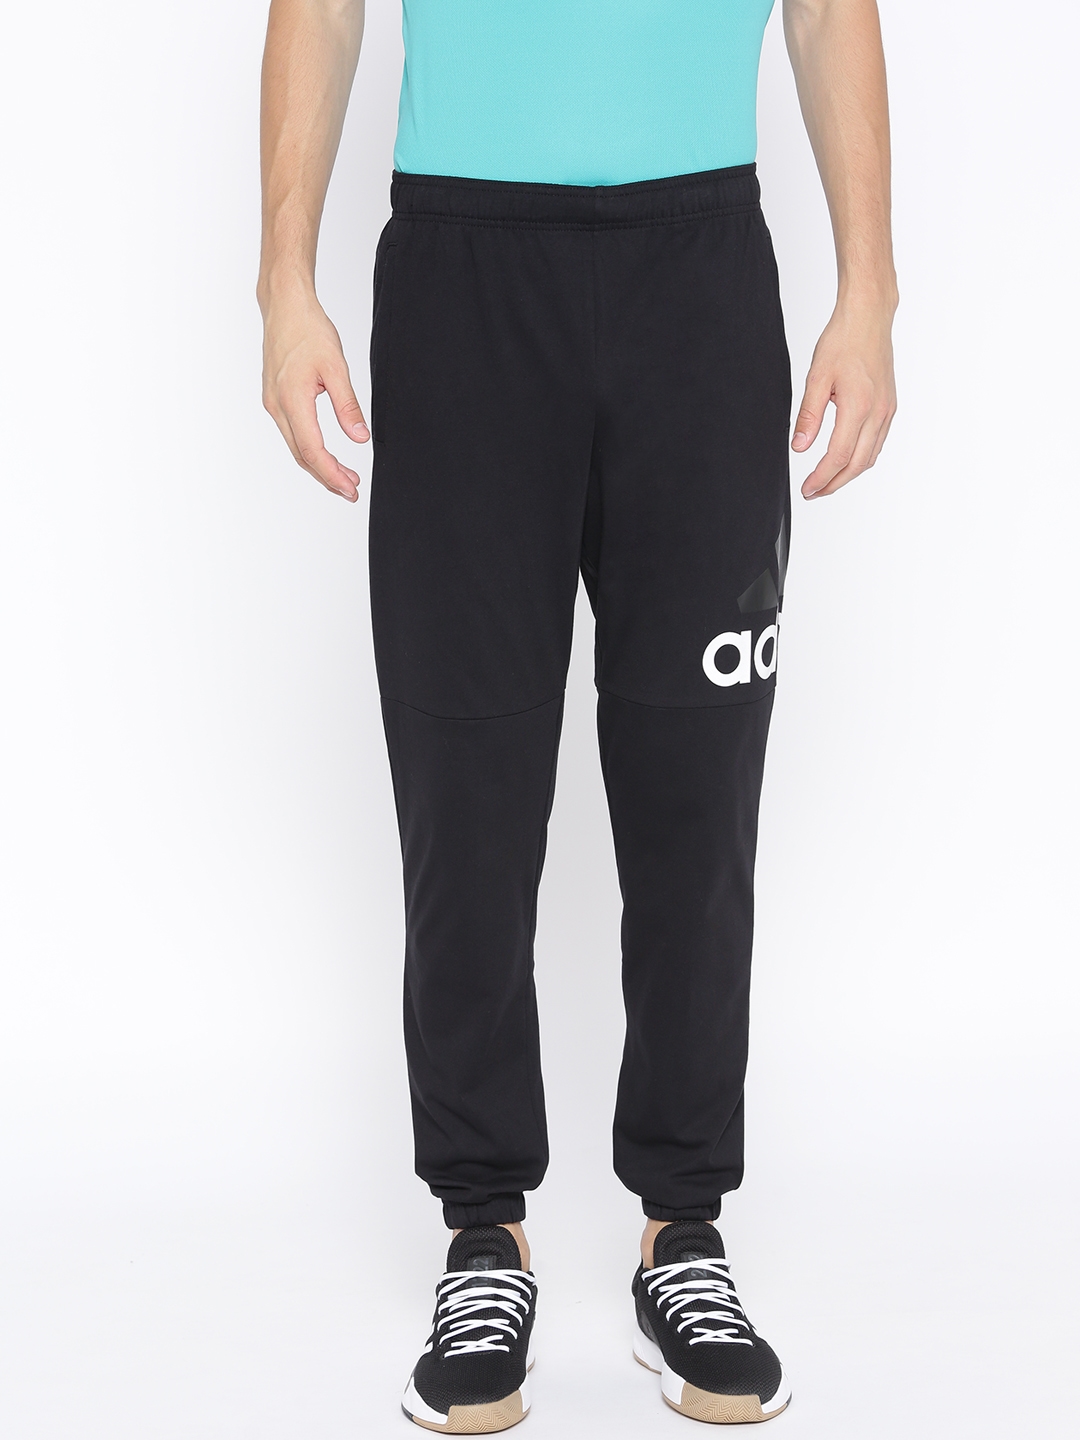 Adidas 3Stripes FT TC Pants Tracksuit Trousers Mens Buy 49 OFF